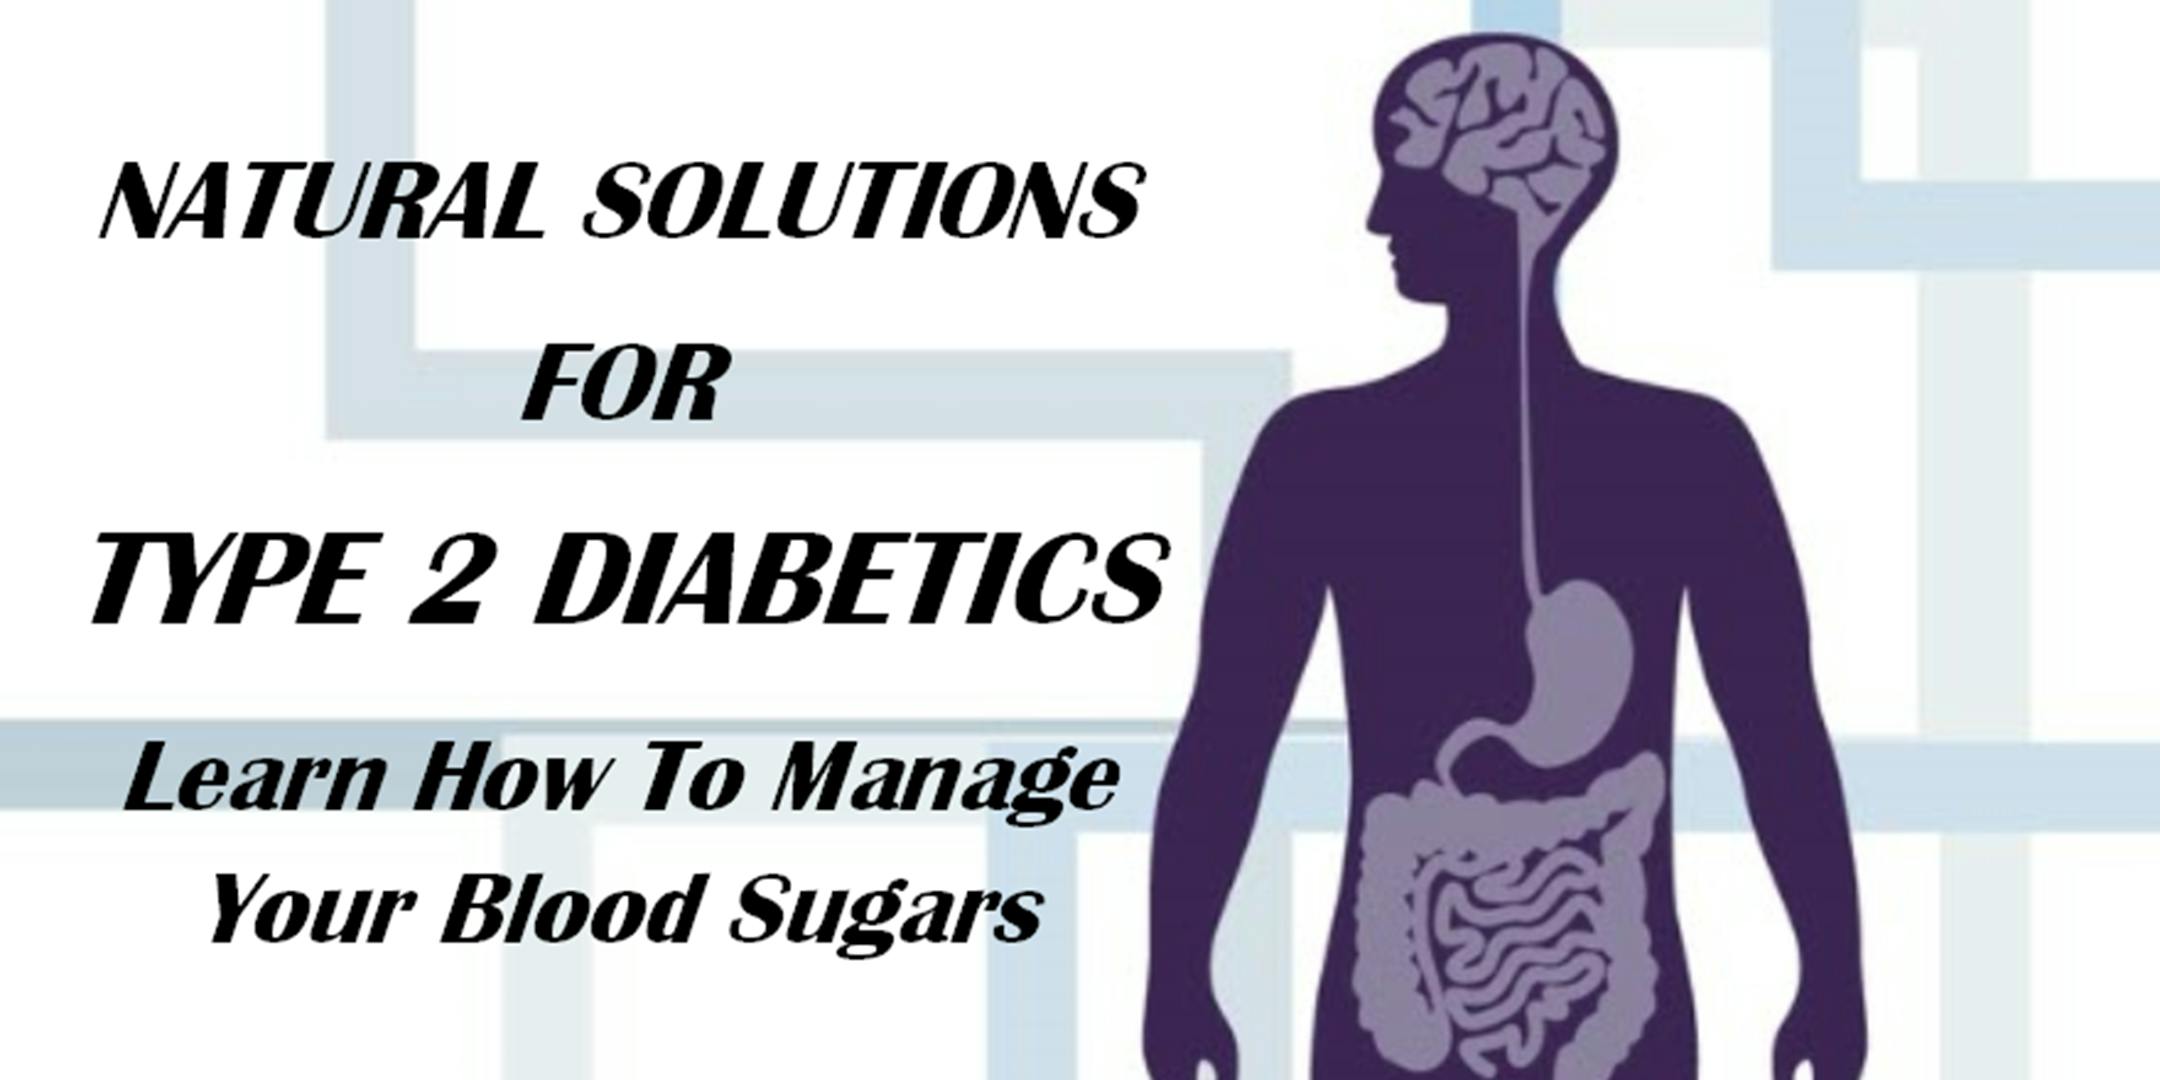 AK01 / Natural Solutions for Type 2 Diabetics / Learn How To Manage Your Blood Sugars / Anchorage, AK